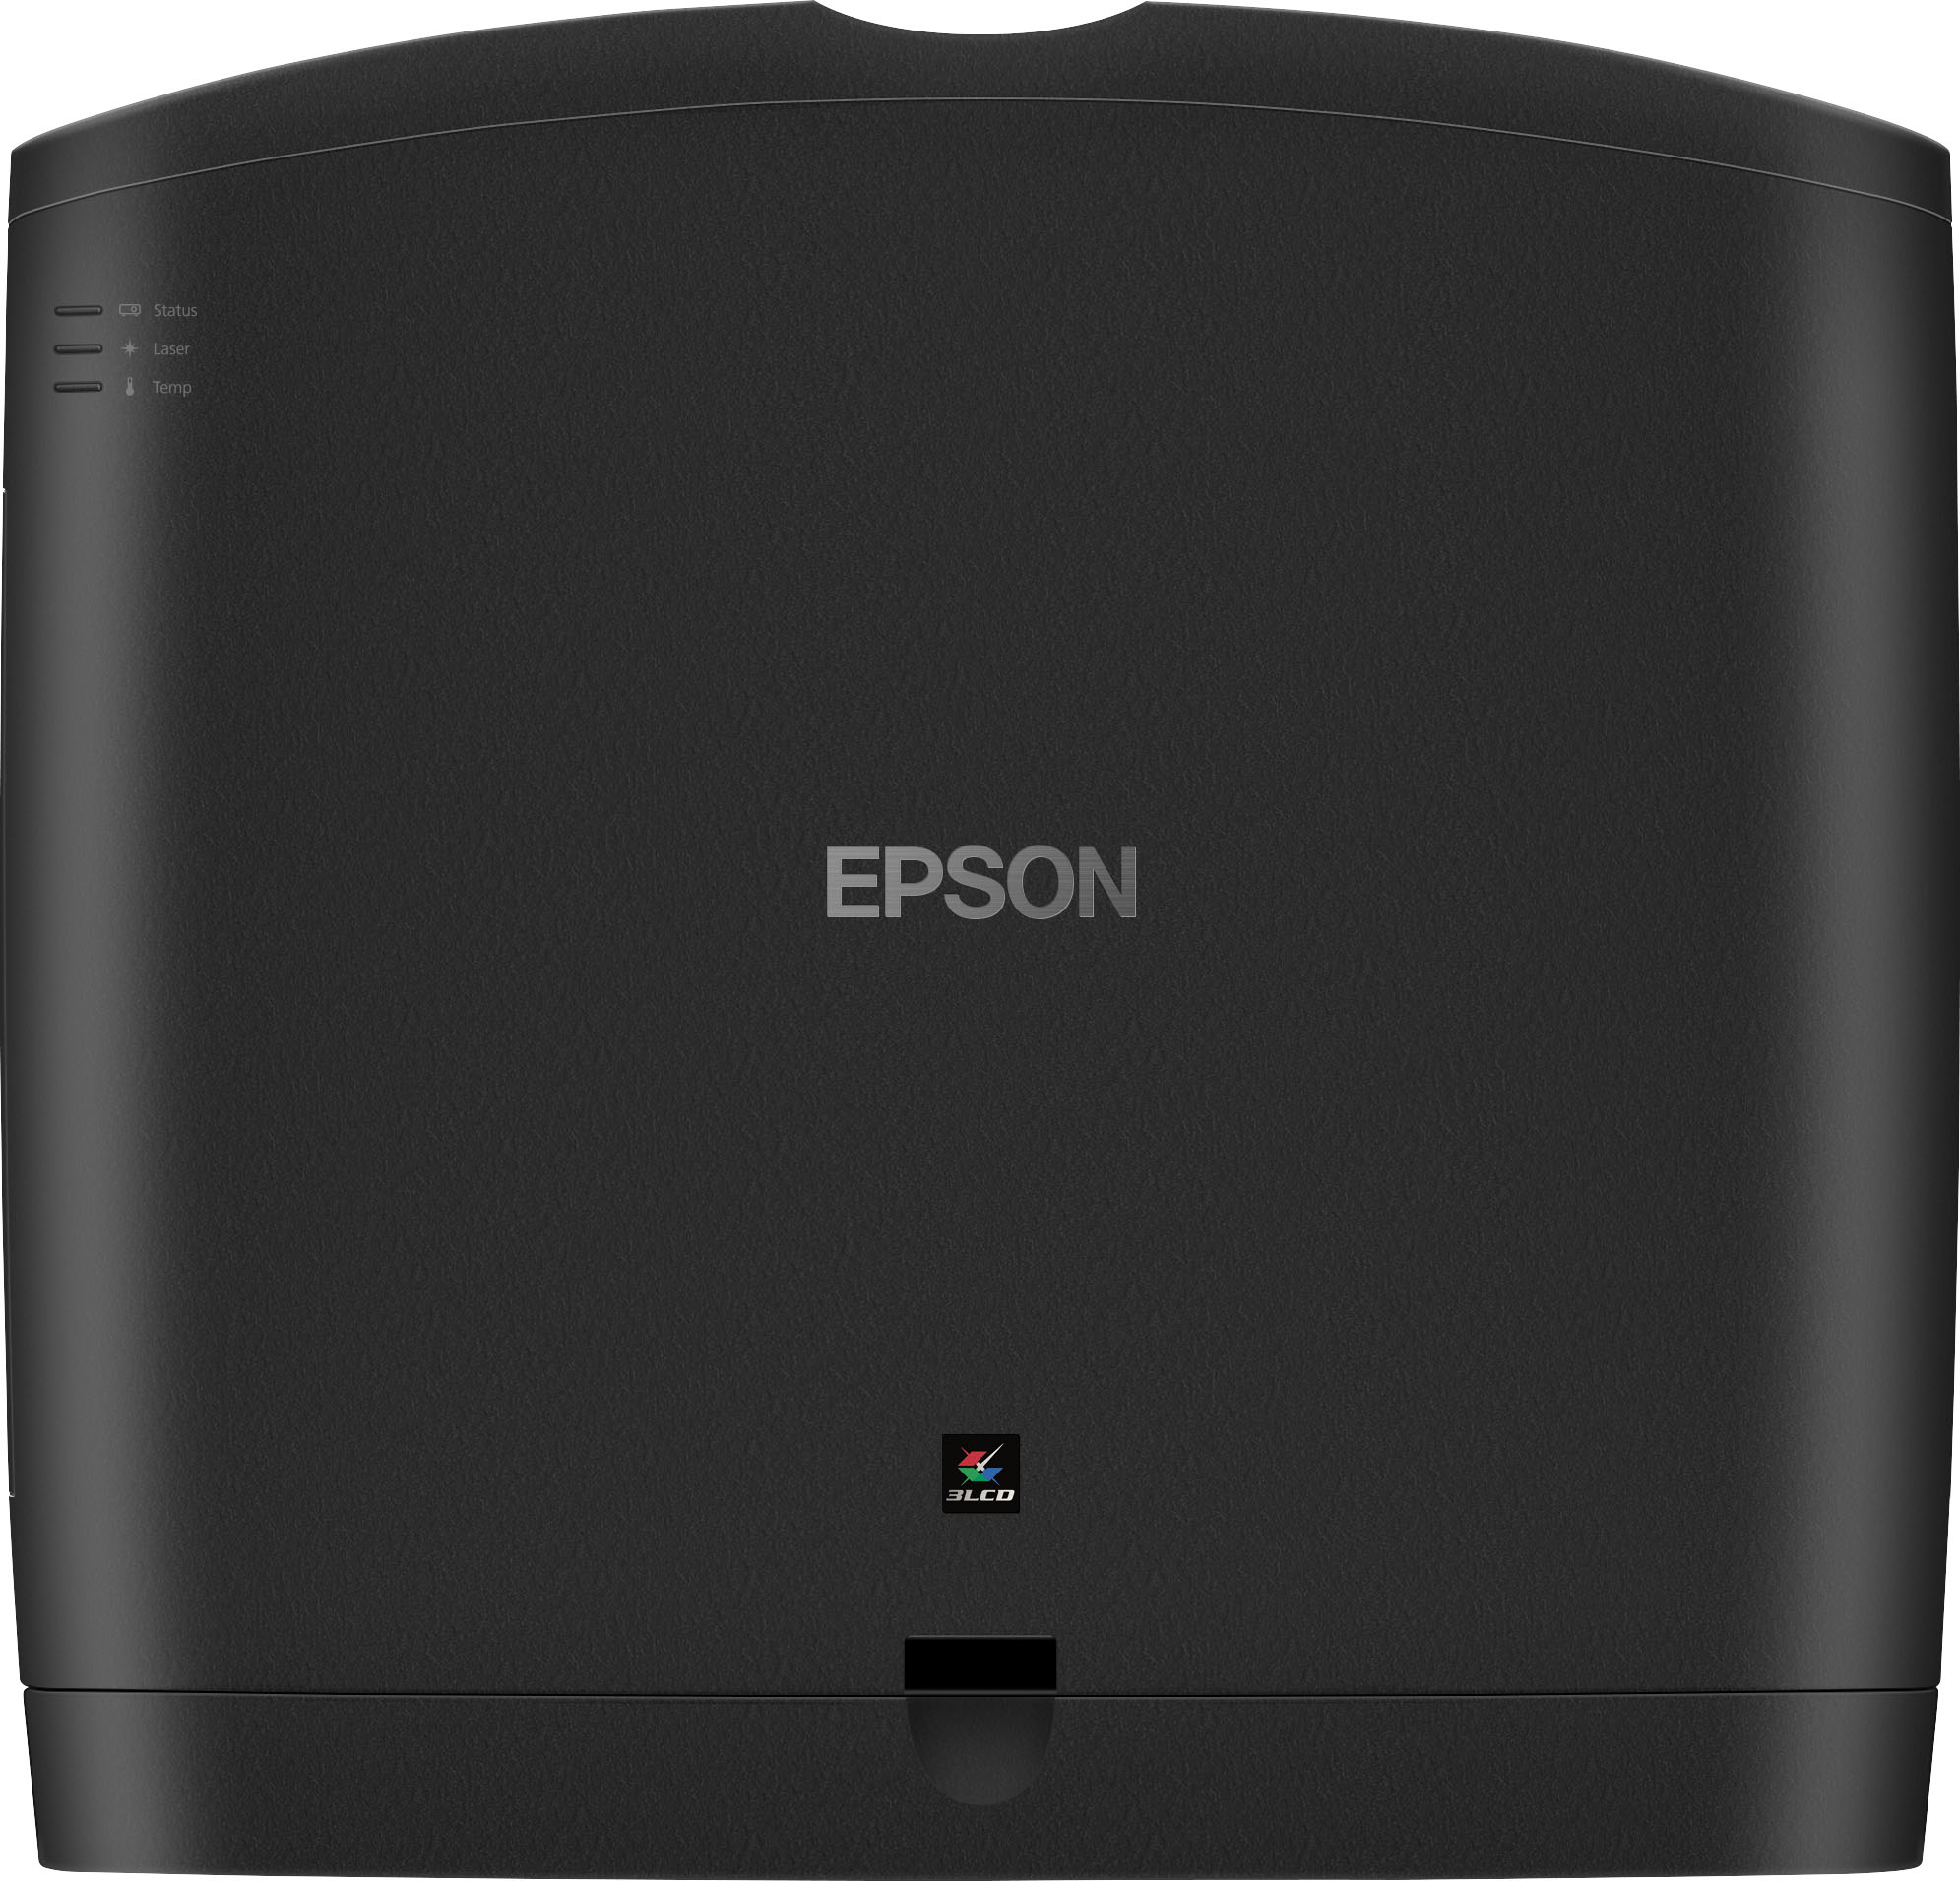 Epson LS12000 4K Home Theater Laser Projector with 2700 Lumens - Black -  Epson Epson-LS12000